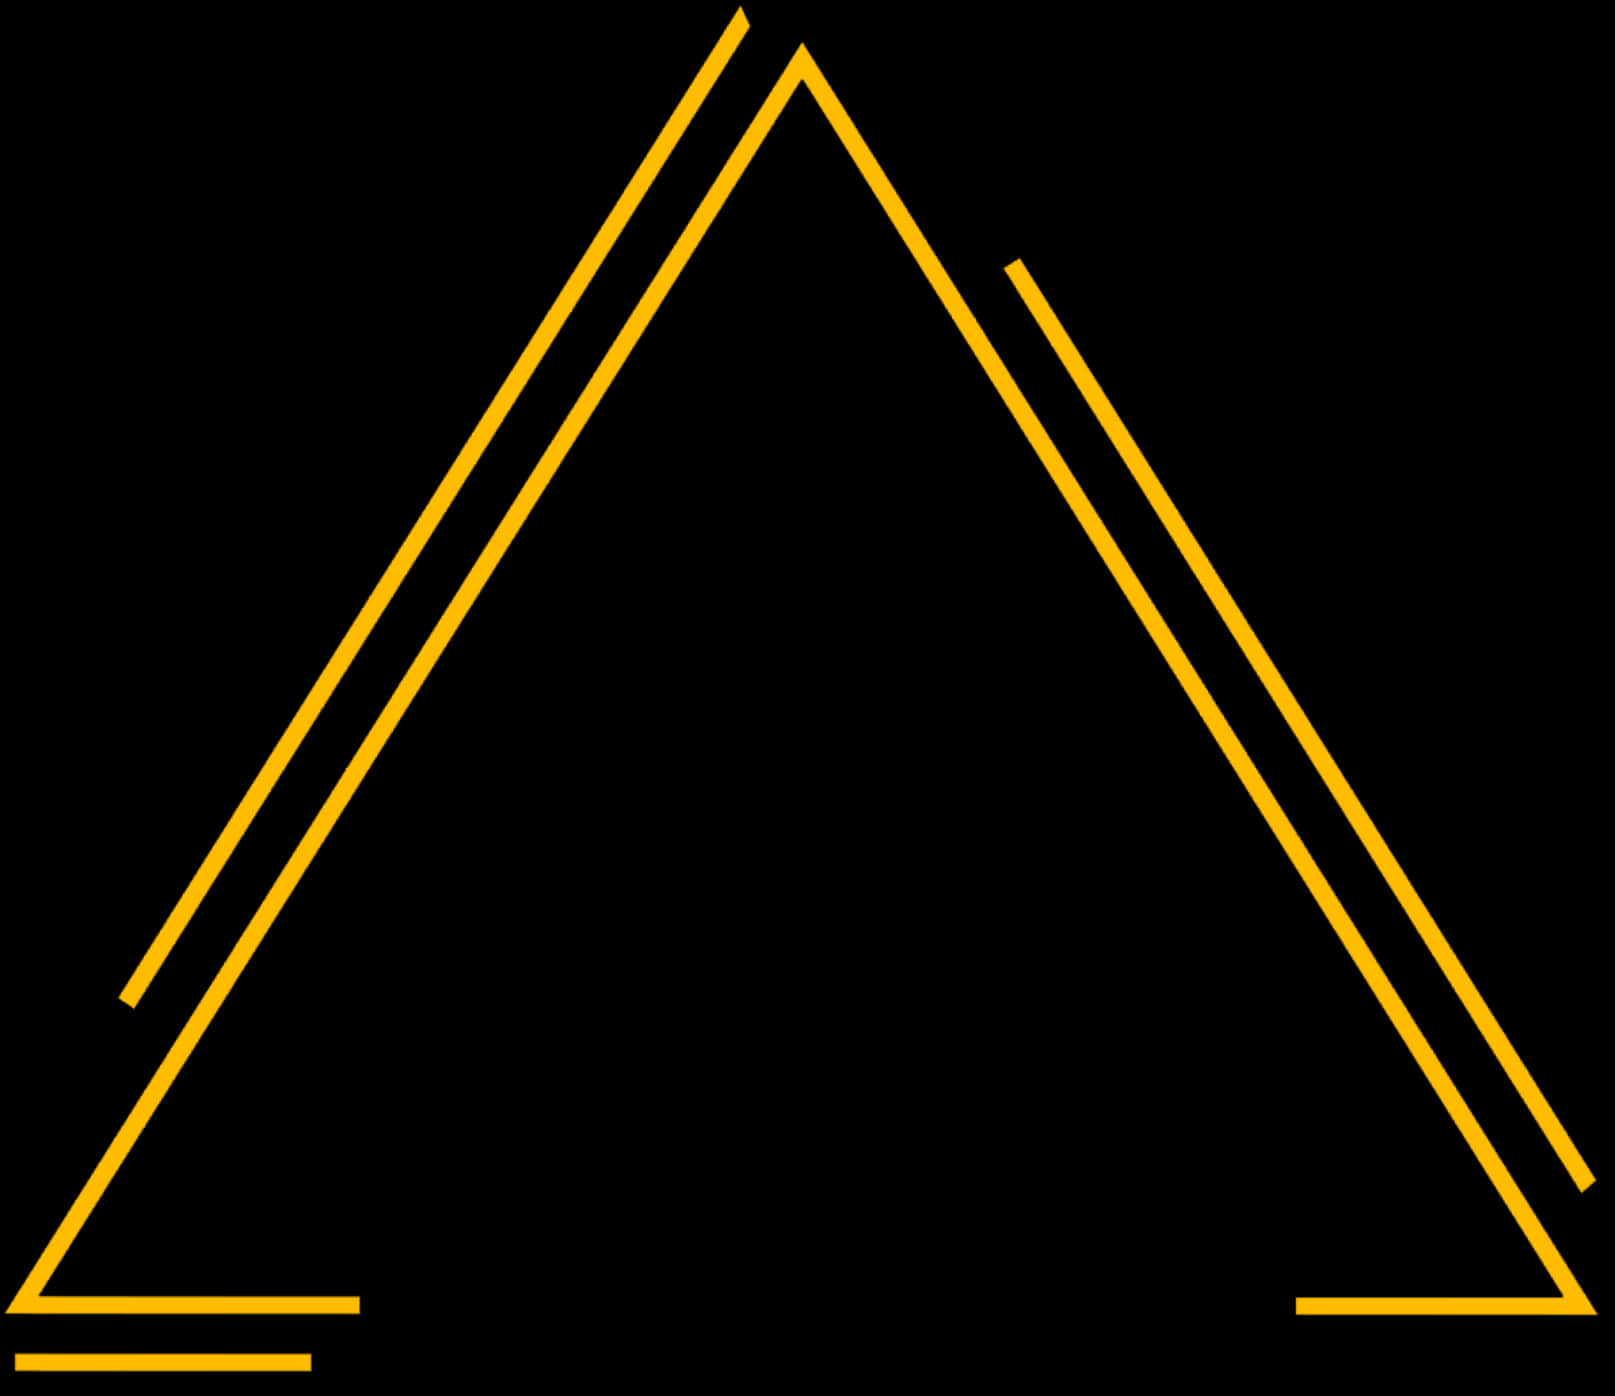 A Triangle With Yellow Lines On A Black Background